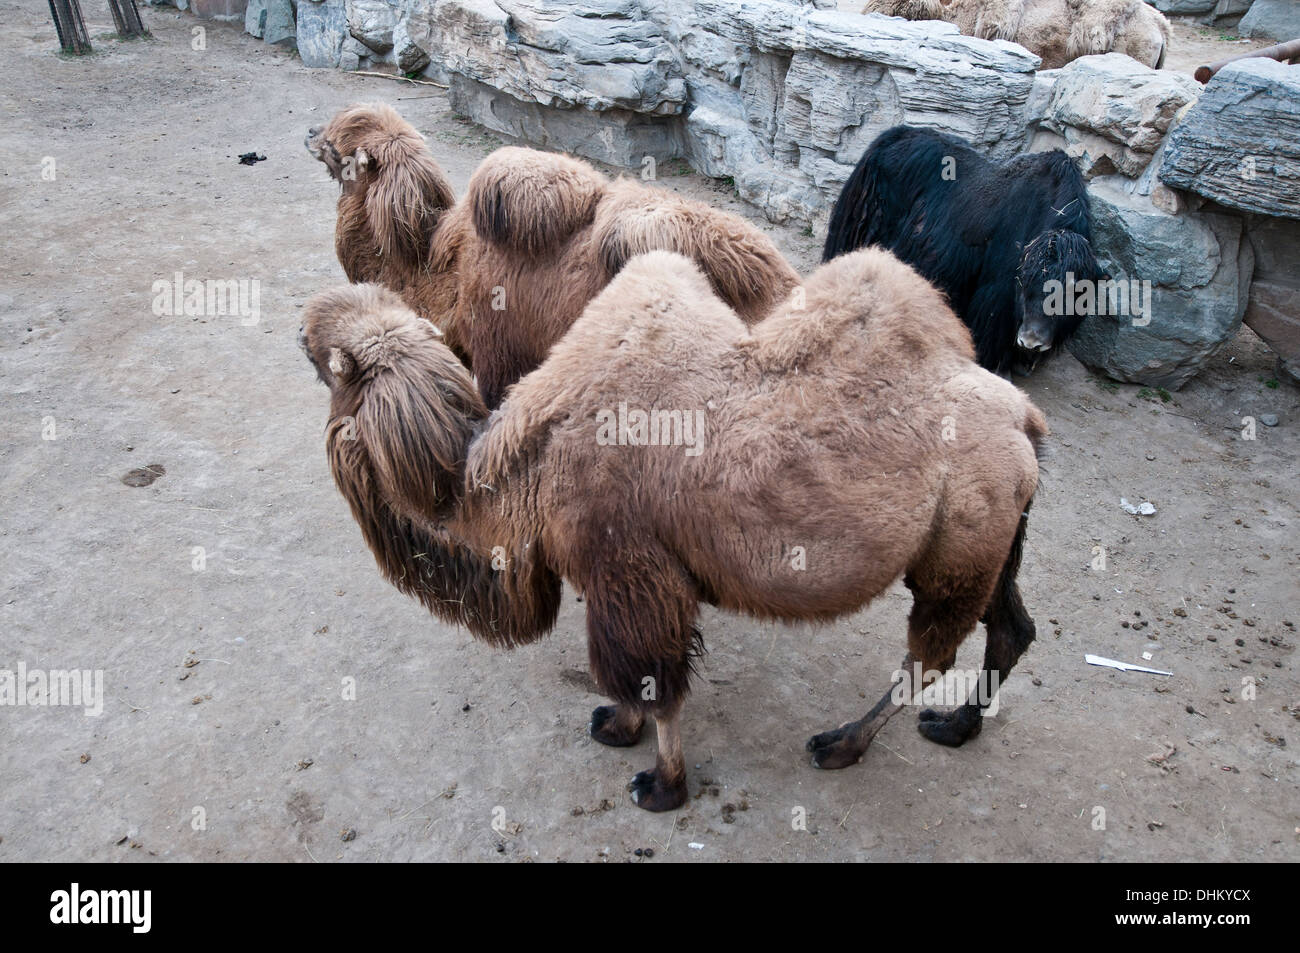 Camelus bactrianus known as Domestic or Bactrian camel and Domestic Yak, in Beijing Zoo, Xicheng District, Beijing, China Stock Photo